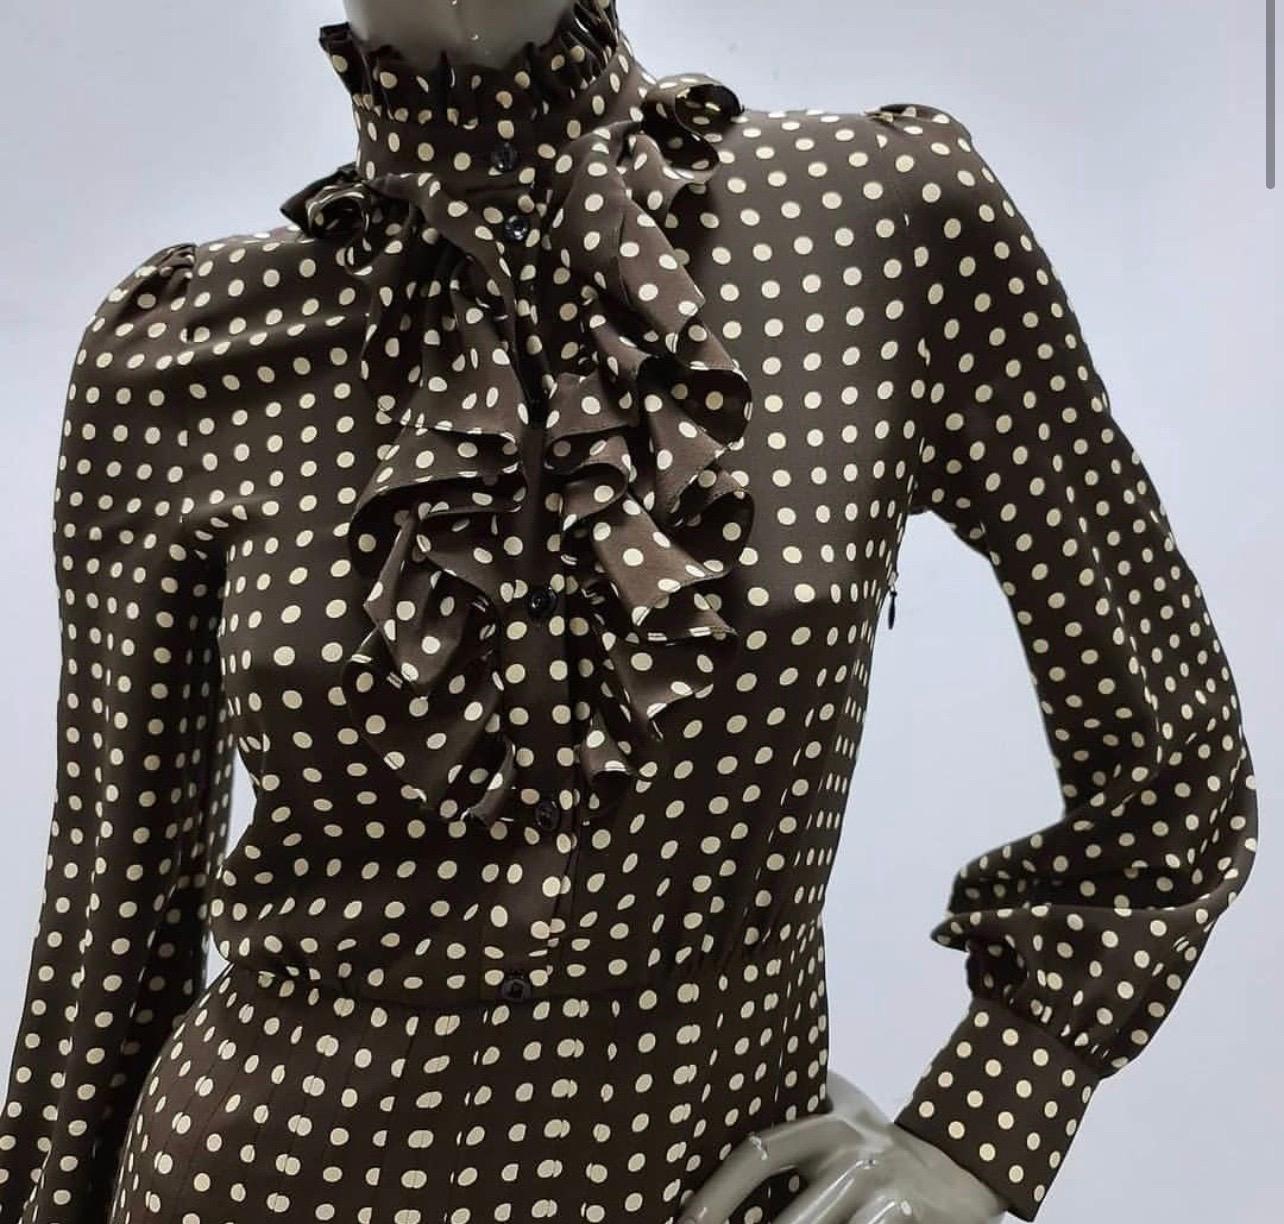 Celene Silk Long Sleeves Polka Dot Dress from 2020-21FW 
Brown colour.
Sz.36
Condition is very good.
For buyers from EU we can provide shipping from Poland. Please demand if you need.